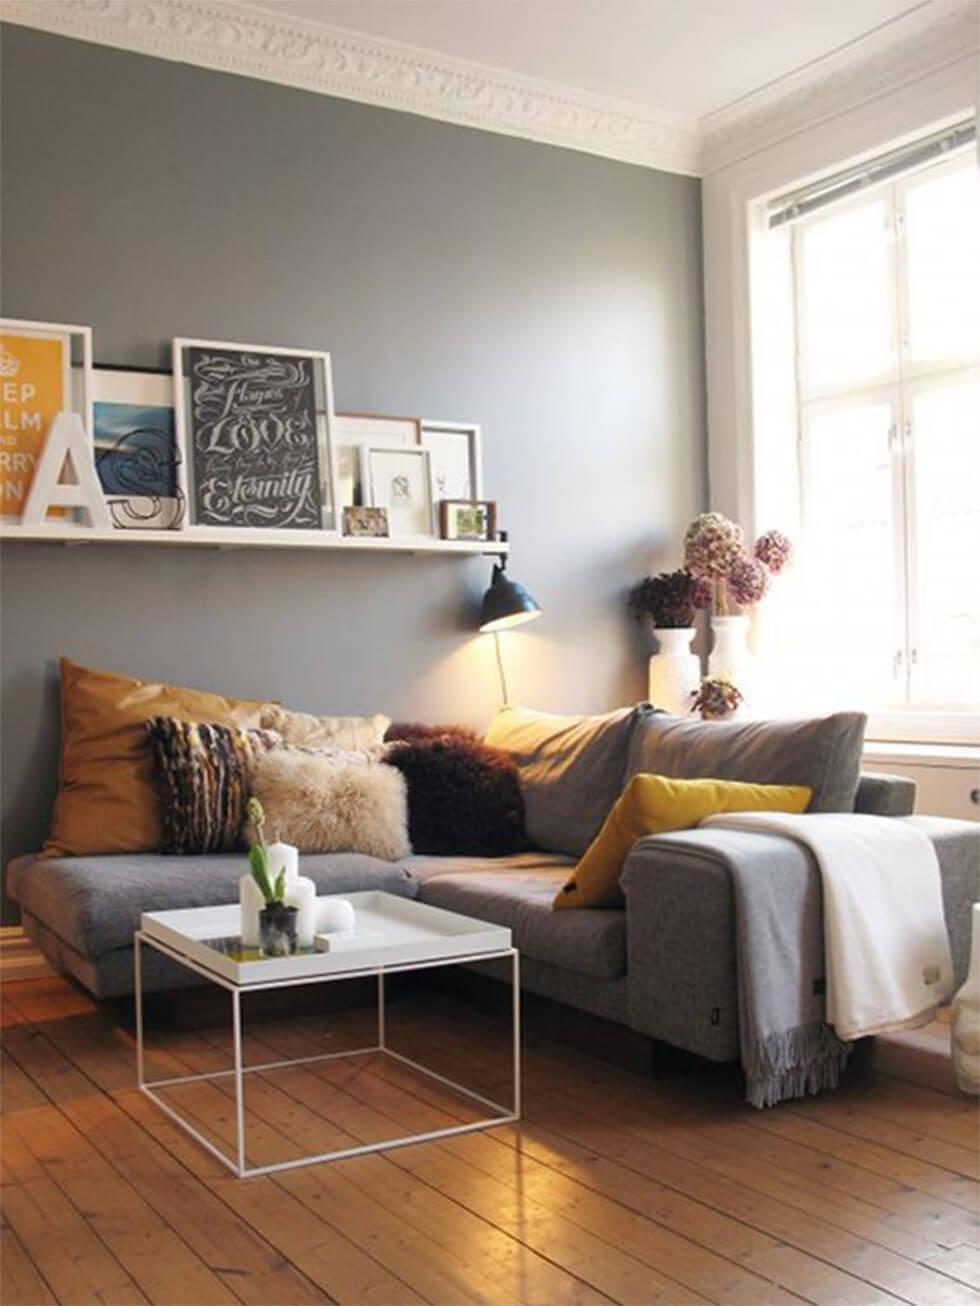 Grey corner sofa in a small living room.